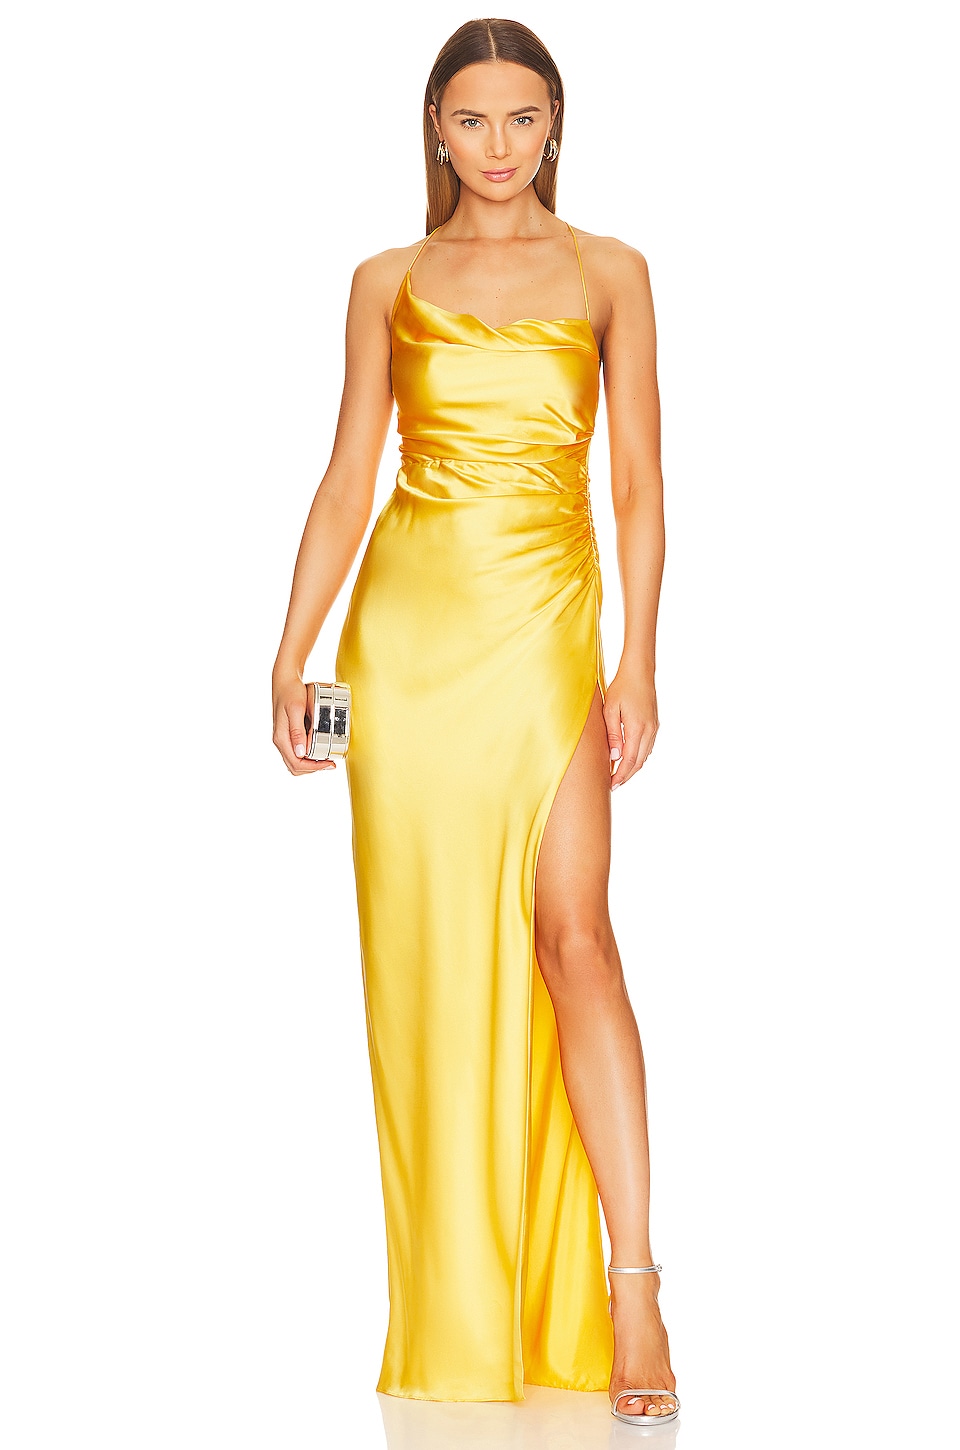 Haute Couture by Mario Sierra. Vol. 2. #canary #yellow #evening #gown  #canaryyellowe… | Zuhair murad haute couture, Haute couture wedding dress,  Yellow evening gown